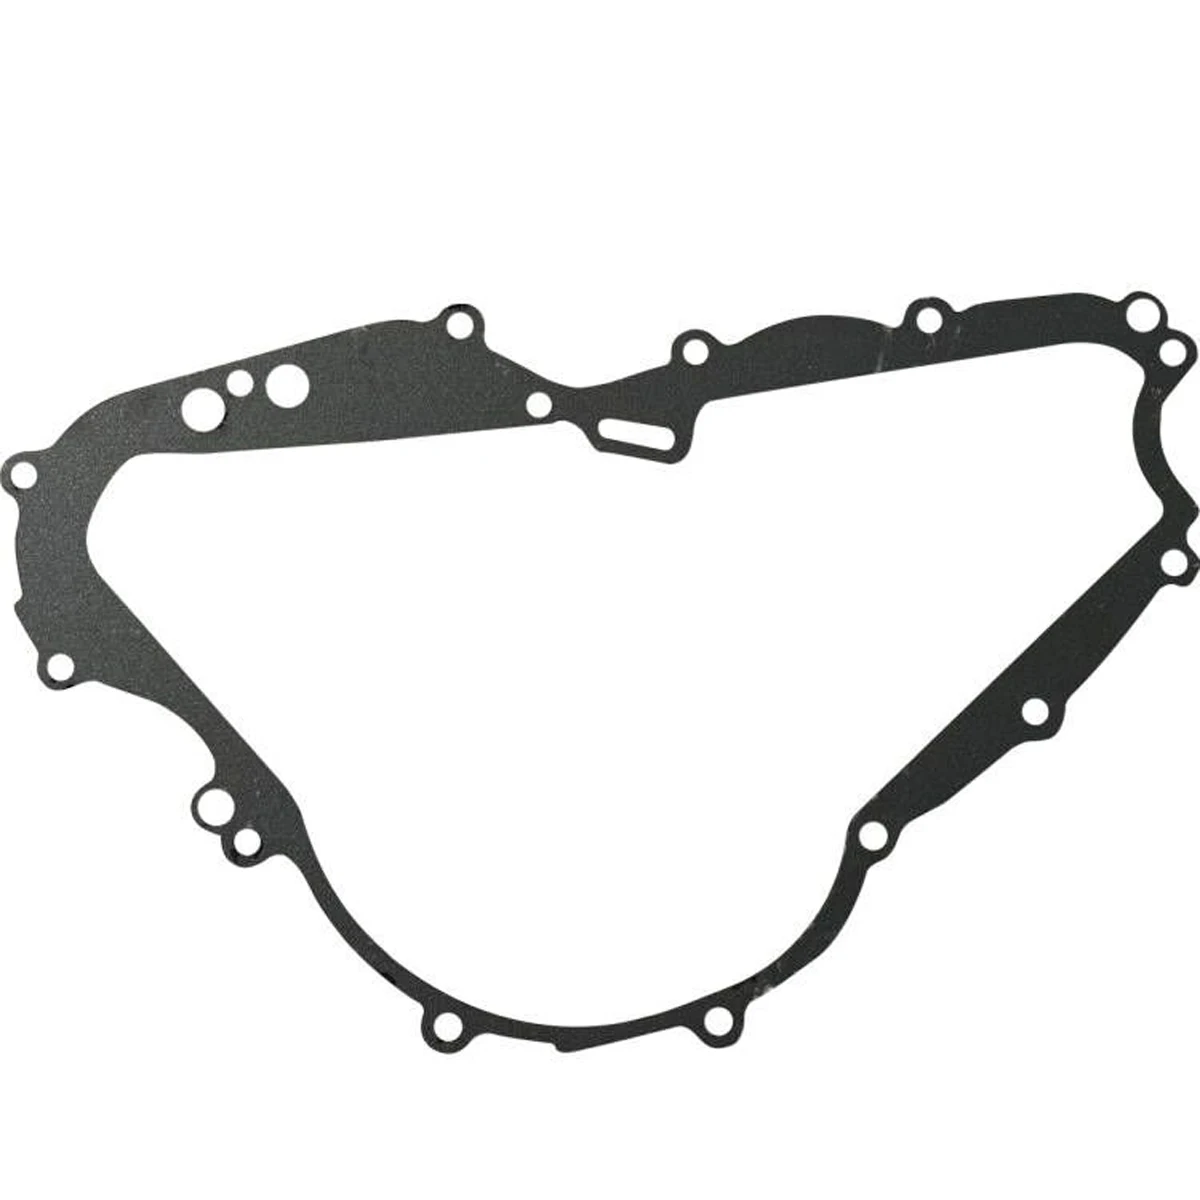 Motorcycle Left Crankcase Clutch Cover Gasket For BMW F650CS G650GS G 650 GS 09-14 Sertao 12-14 G650X COUNTRY